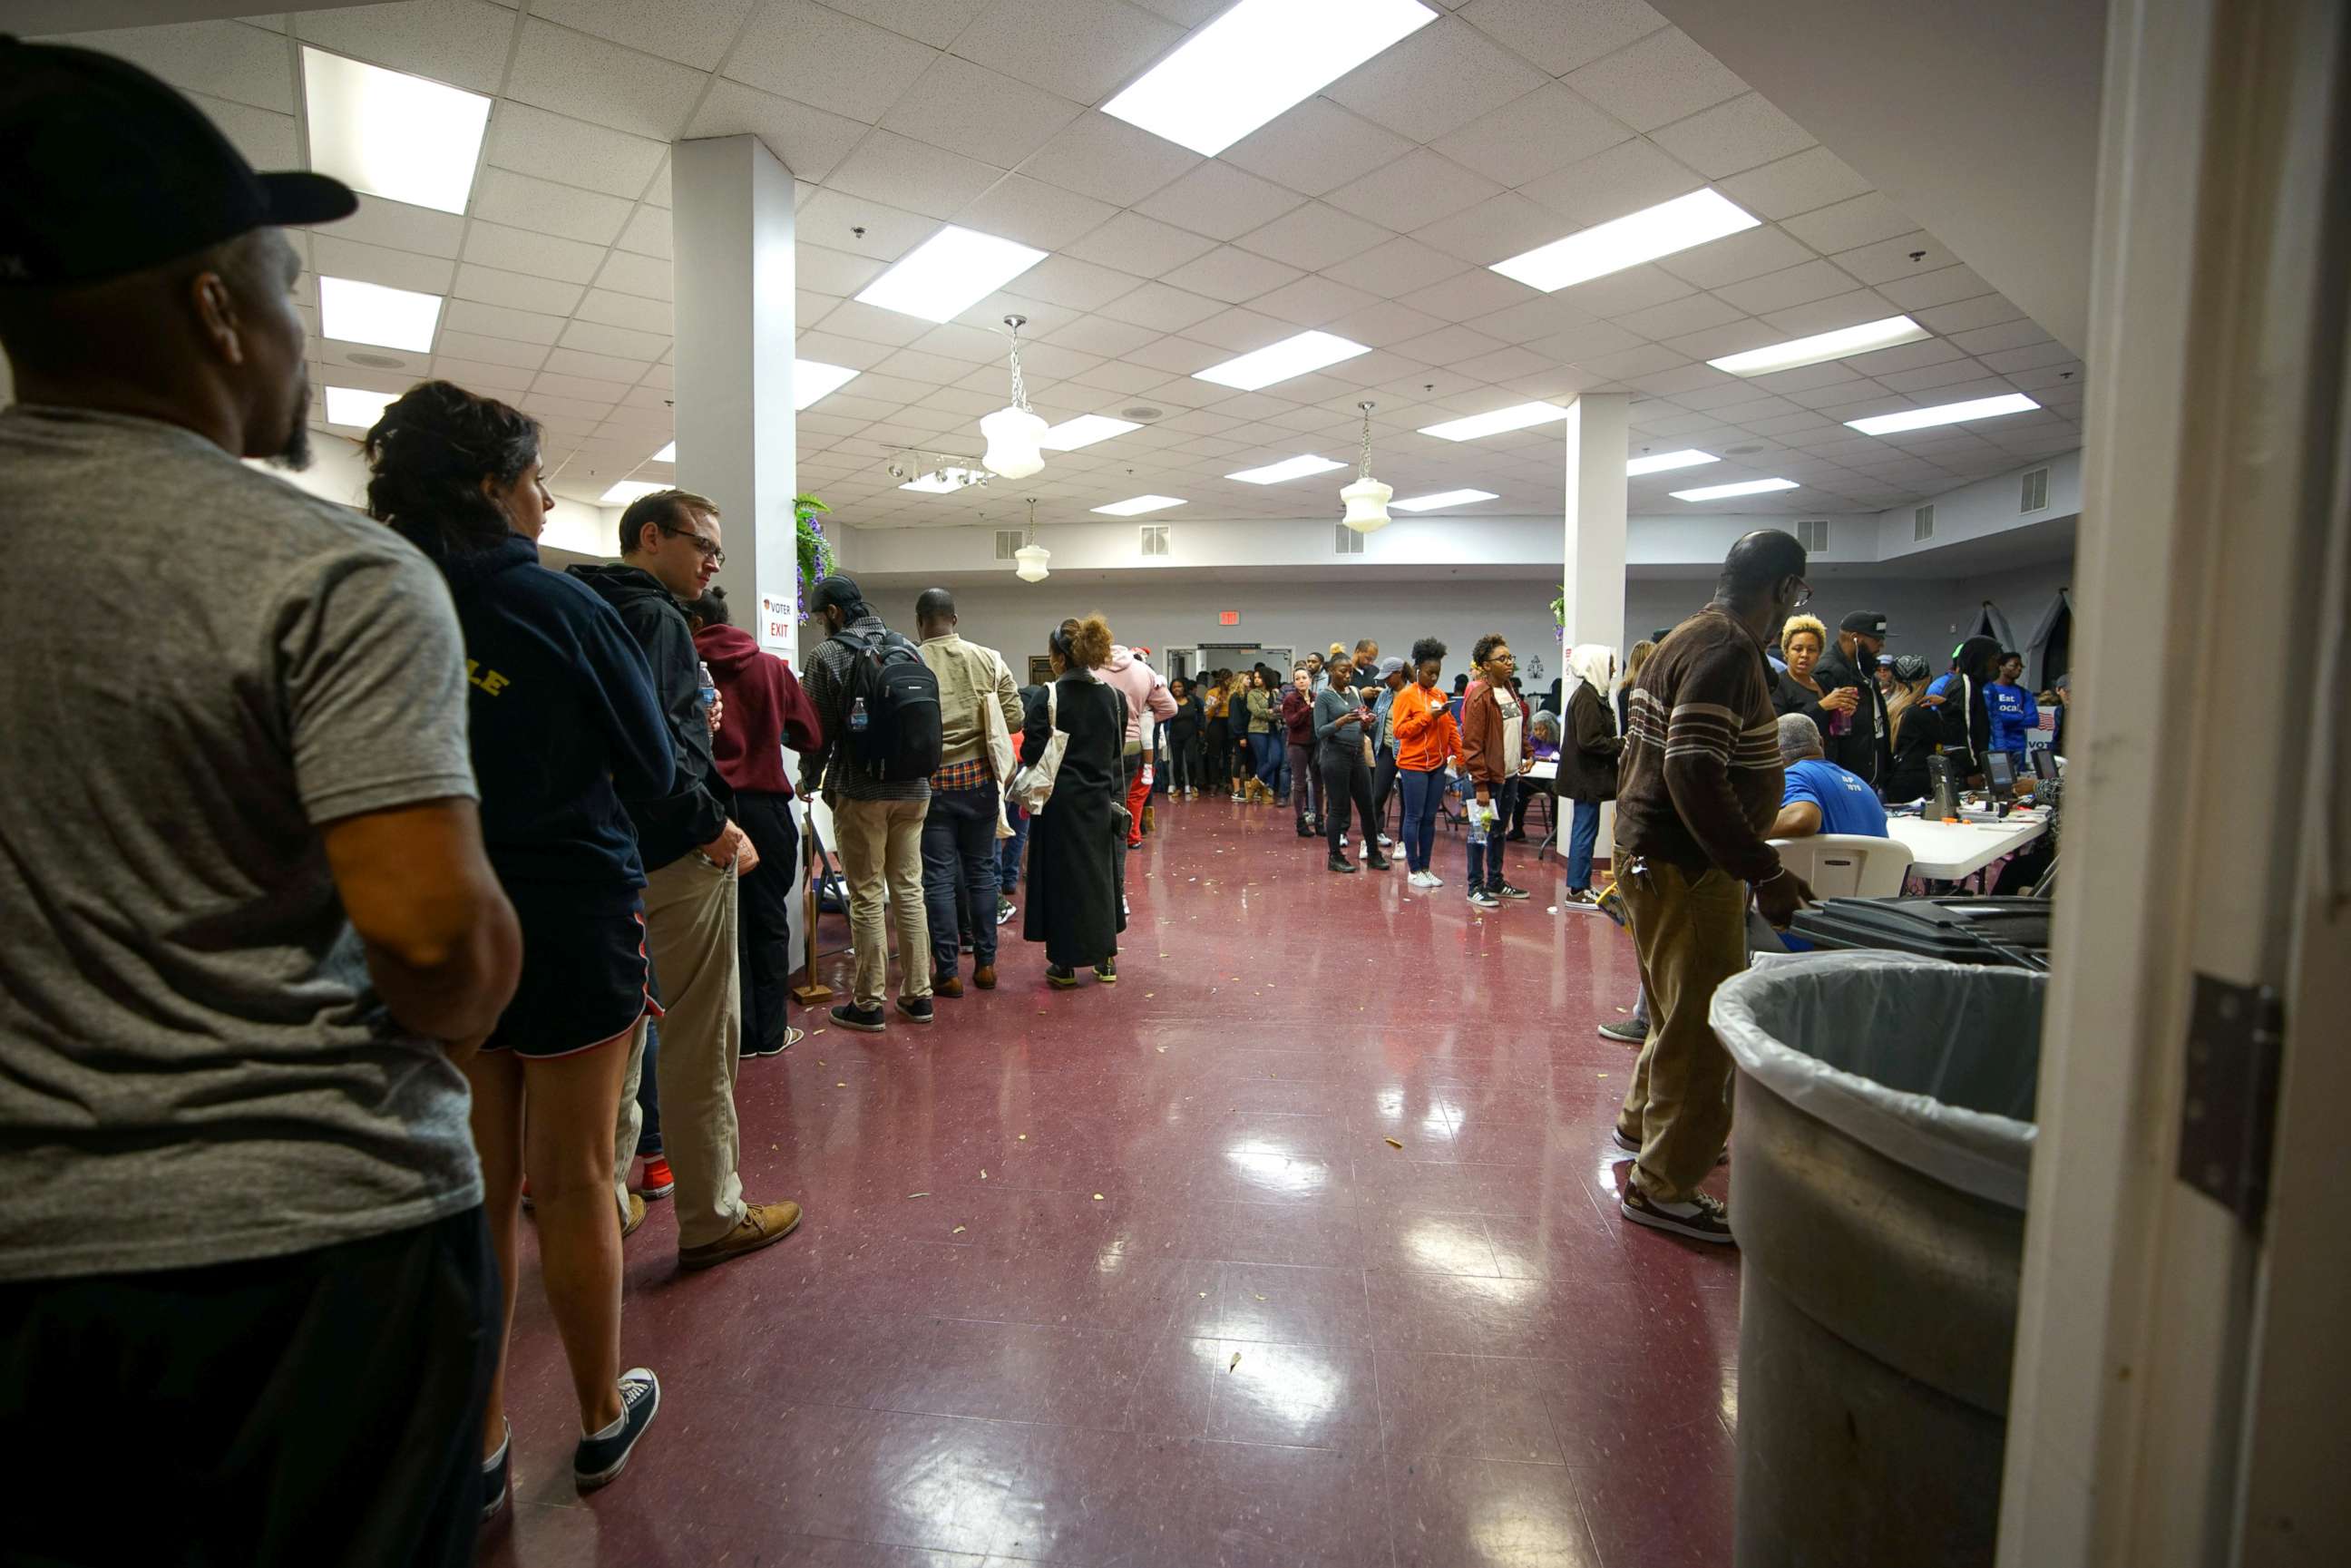 PHOTO: A long line remains past the 7 pm cut off for midterm elections at Liberty Baptist Church in Atlanta, Nov. 6, 2018.